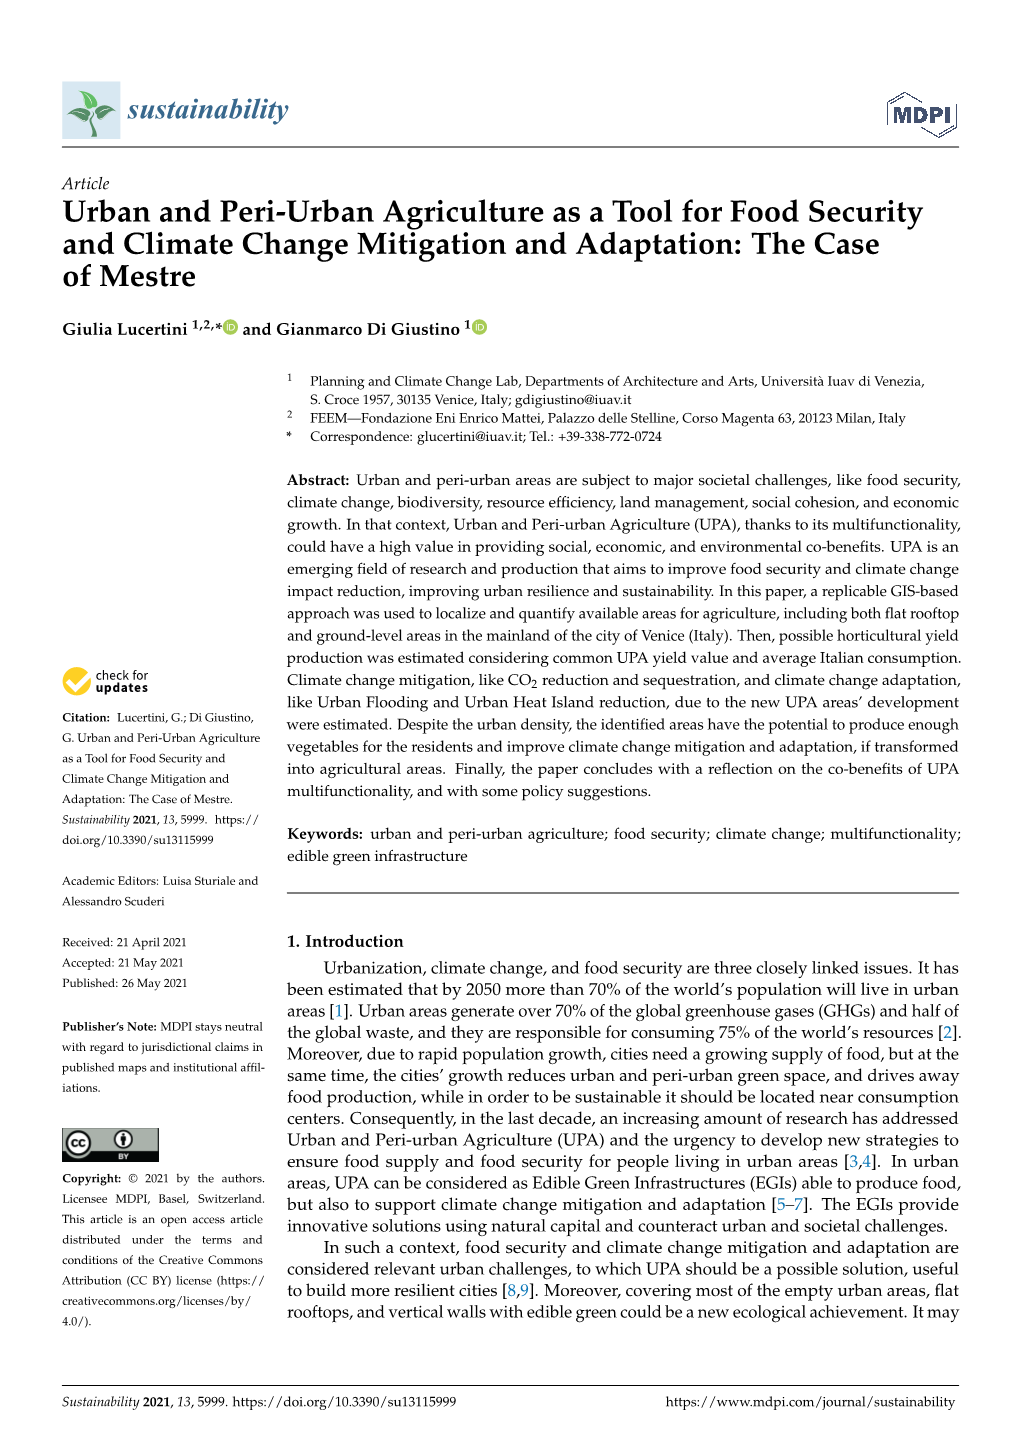 Urban and Peri-Urban Agriculture As a Tool for Food Security and Climate Change Mitigation and Adaptation: the Case of Mestre